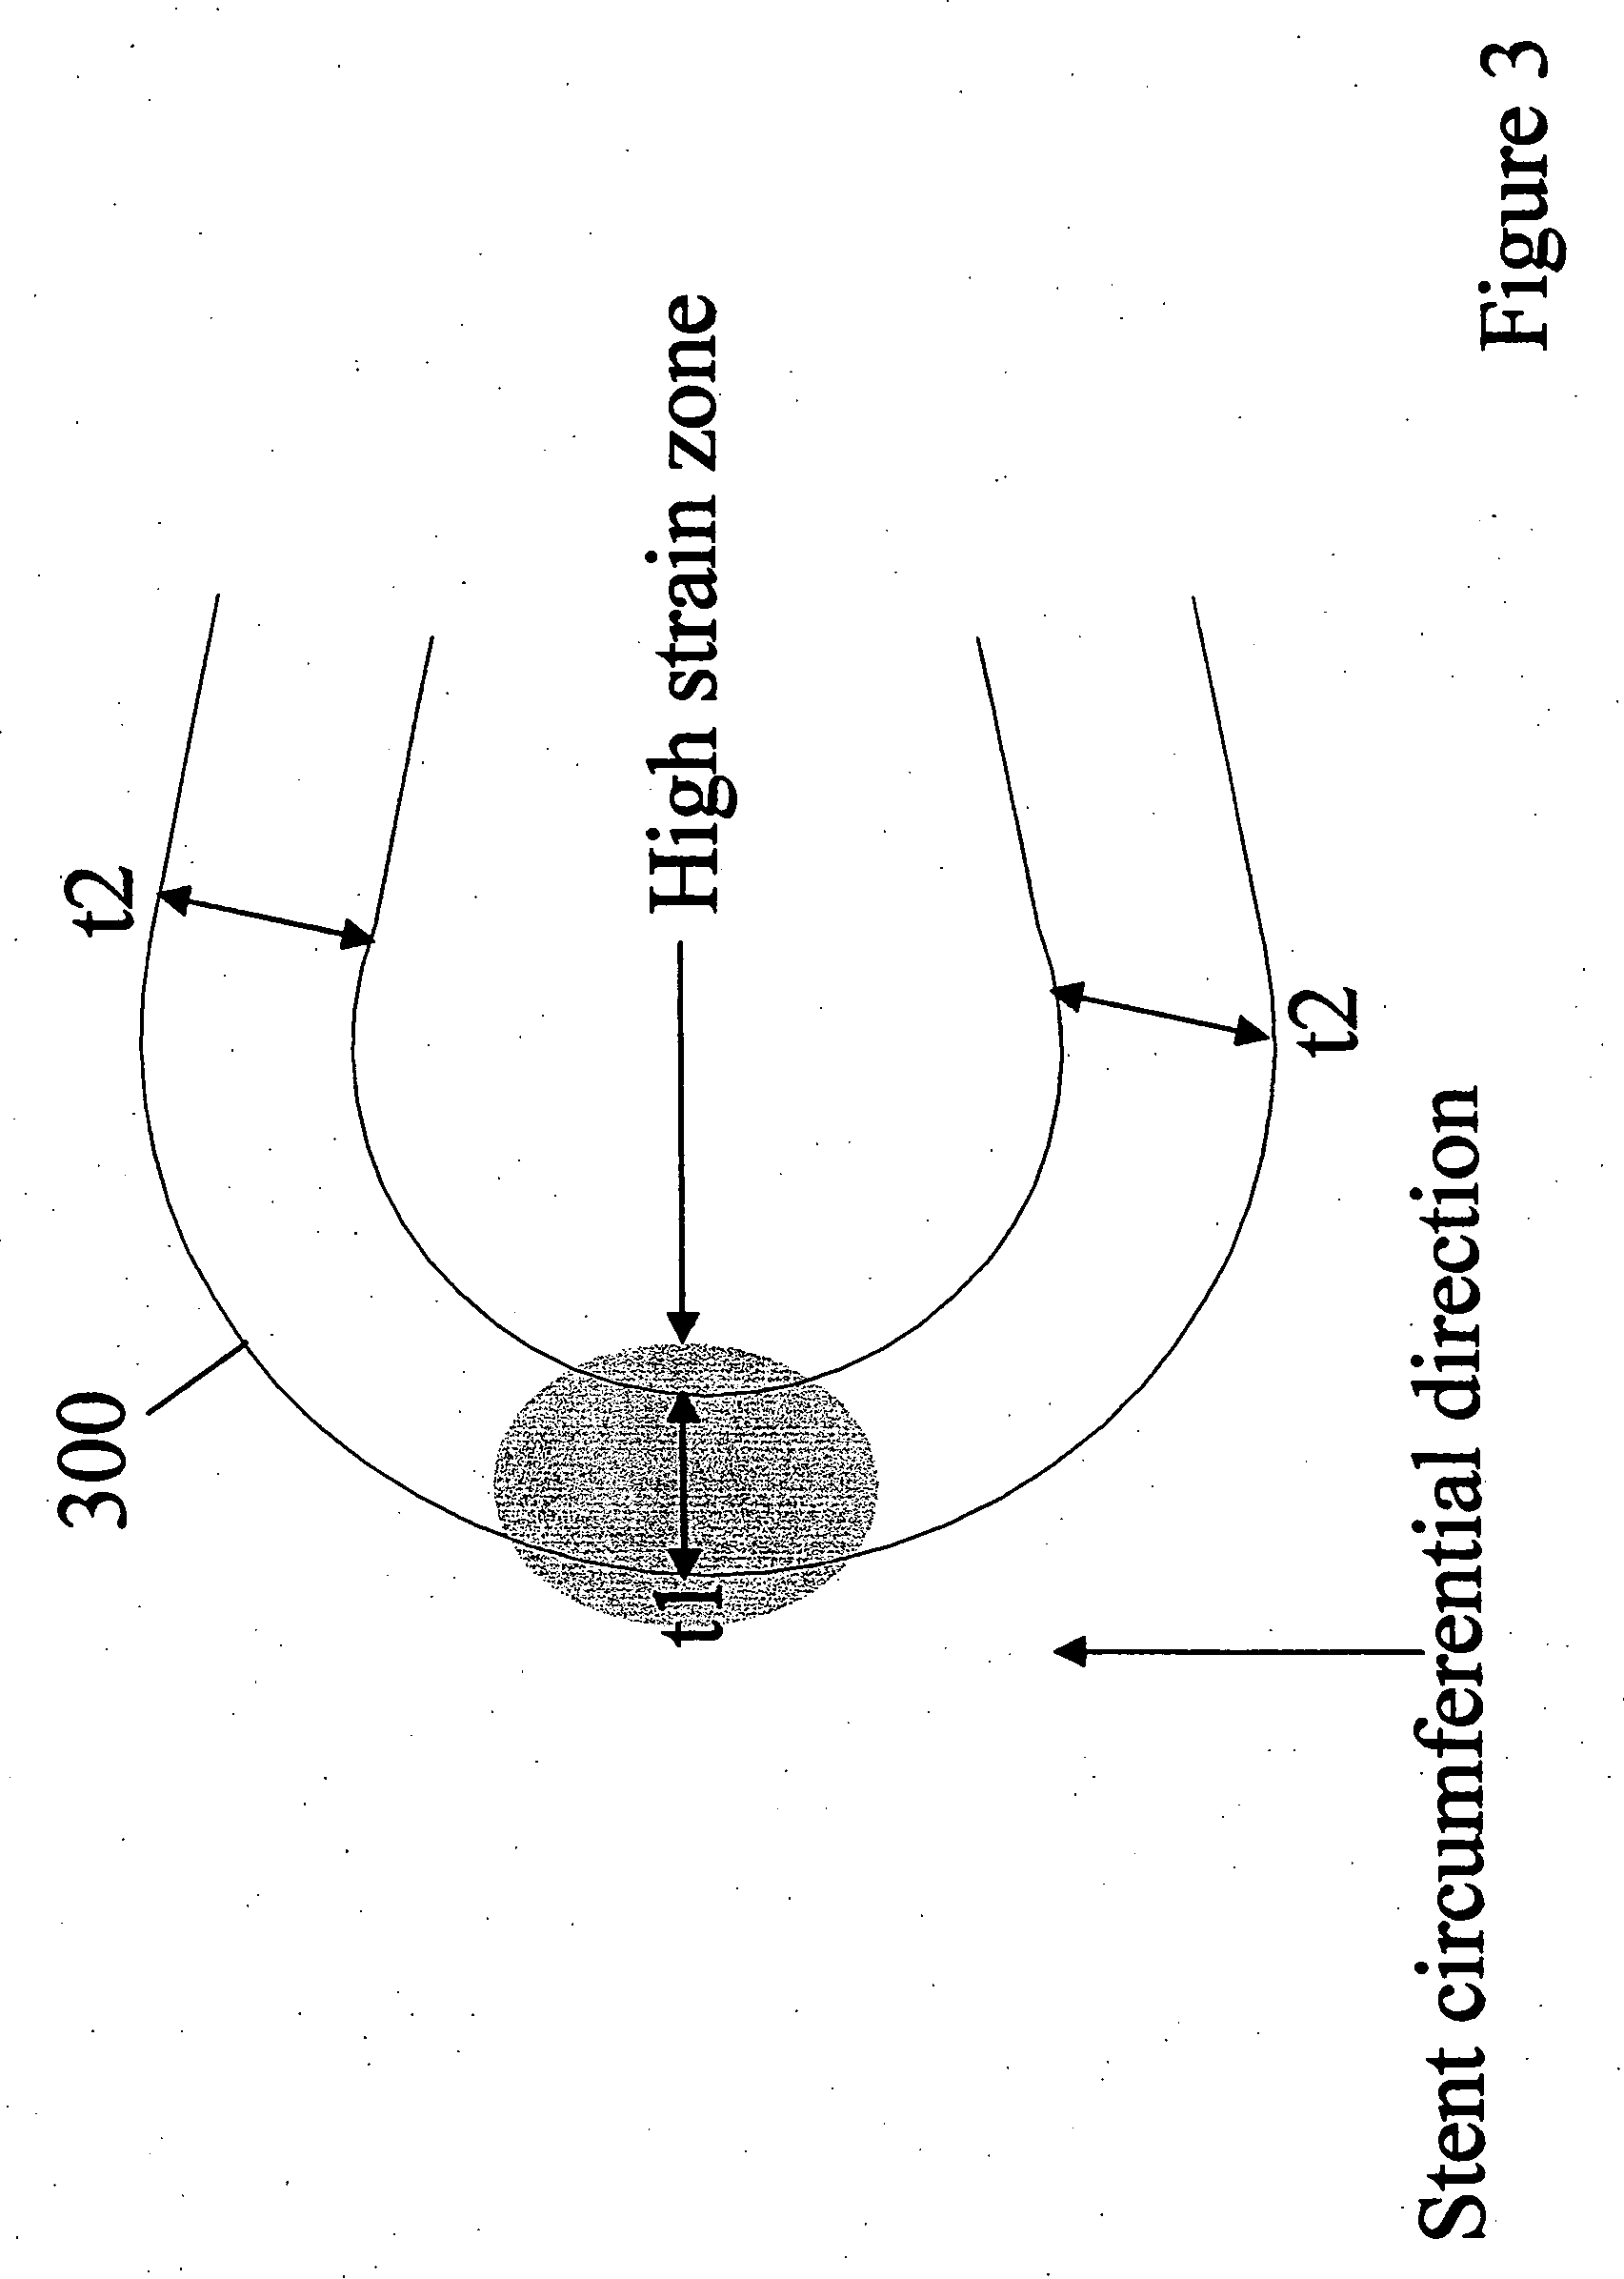 Polymeric stent having modified molecular structures in selected regions of the flexible connectors